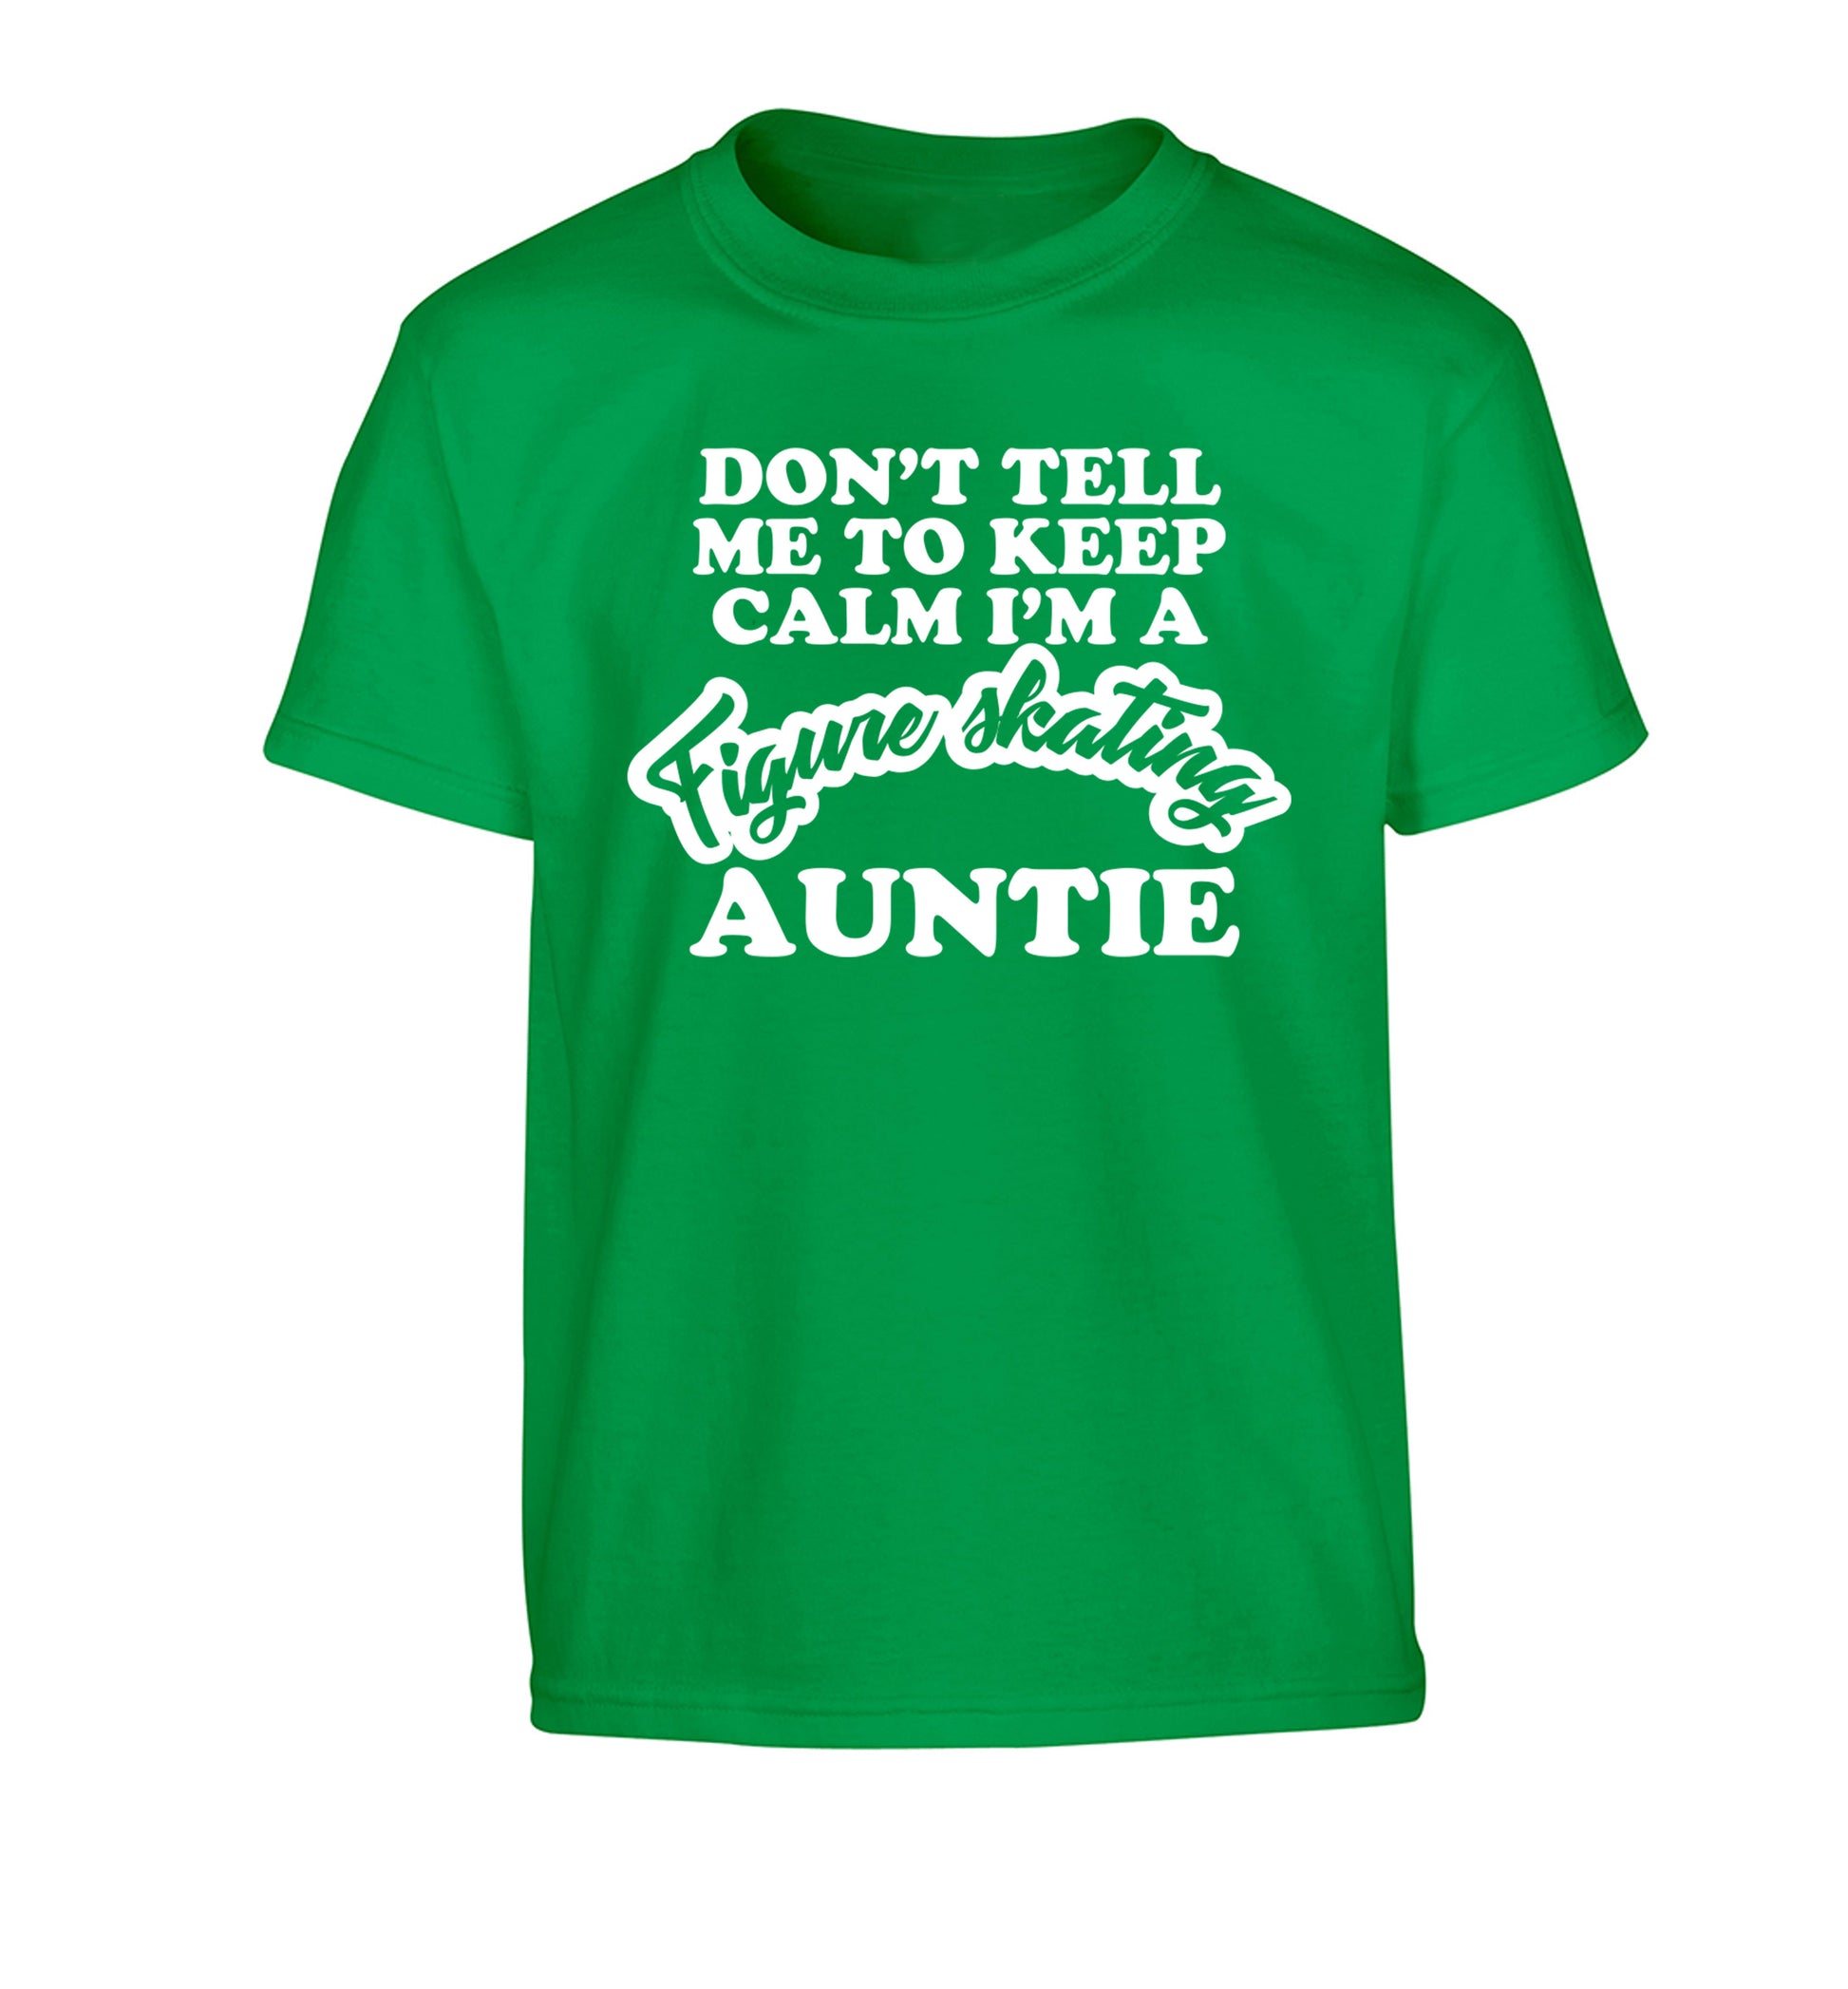 Don't tell me to keep calm I'm a figure skating auntie Children's green Tshirt 12-14 Years